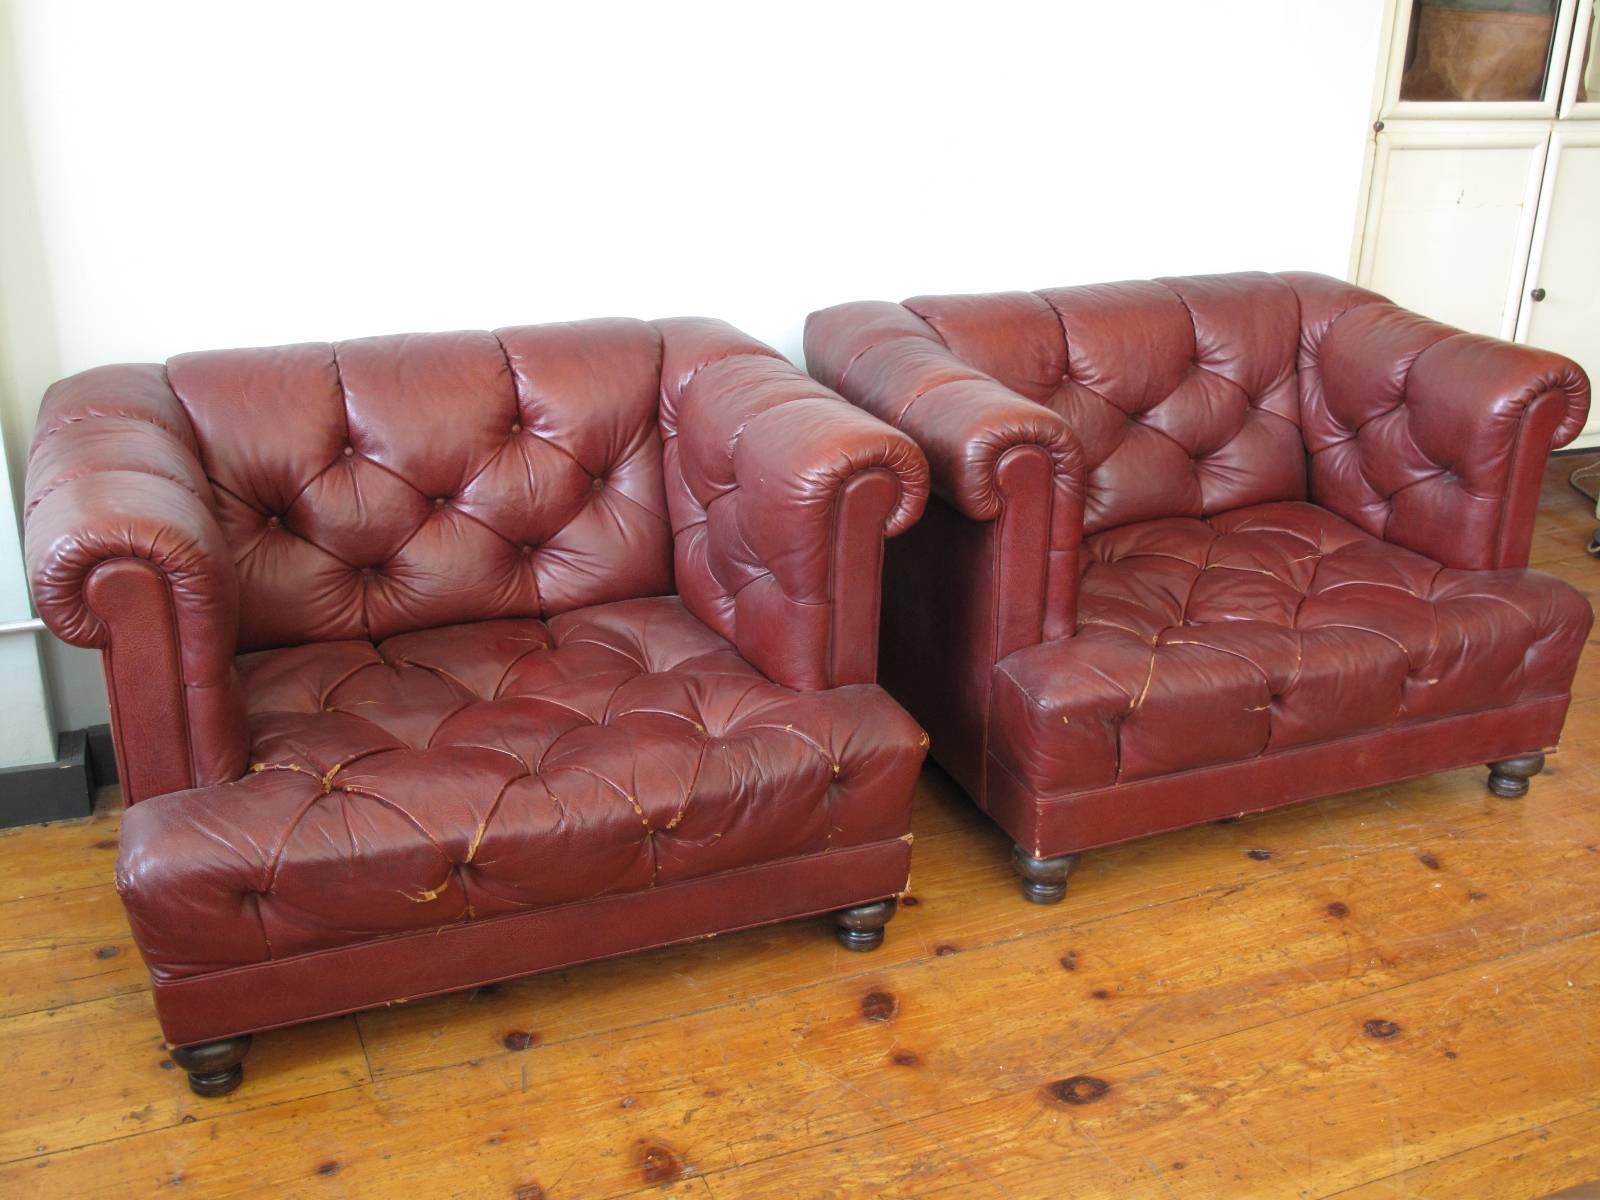 Two 20th century American tufted leather armchairs. Generously wide seat of unusual proportion.